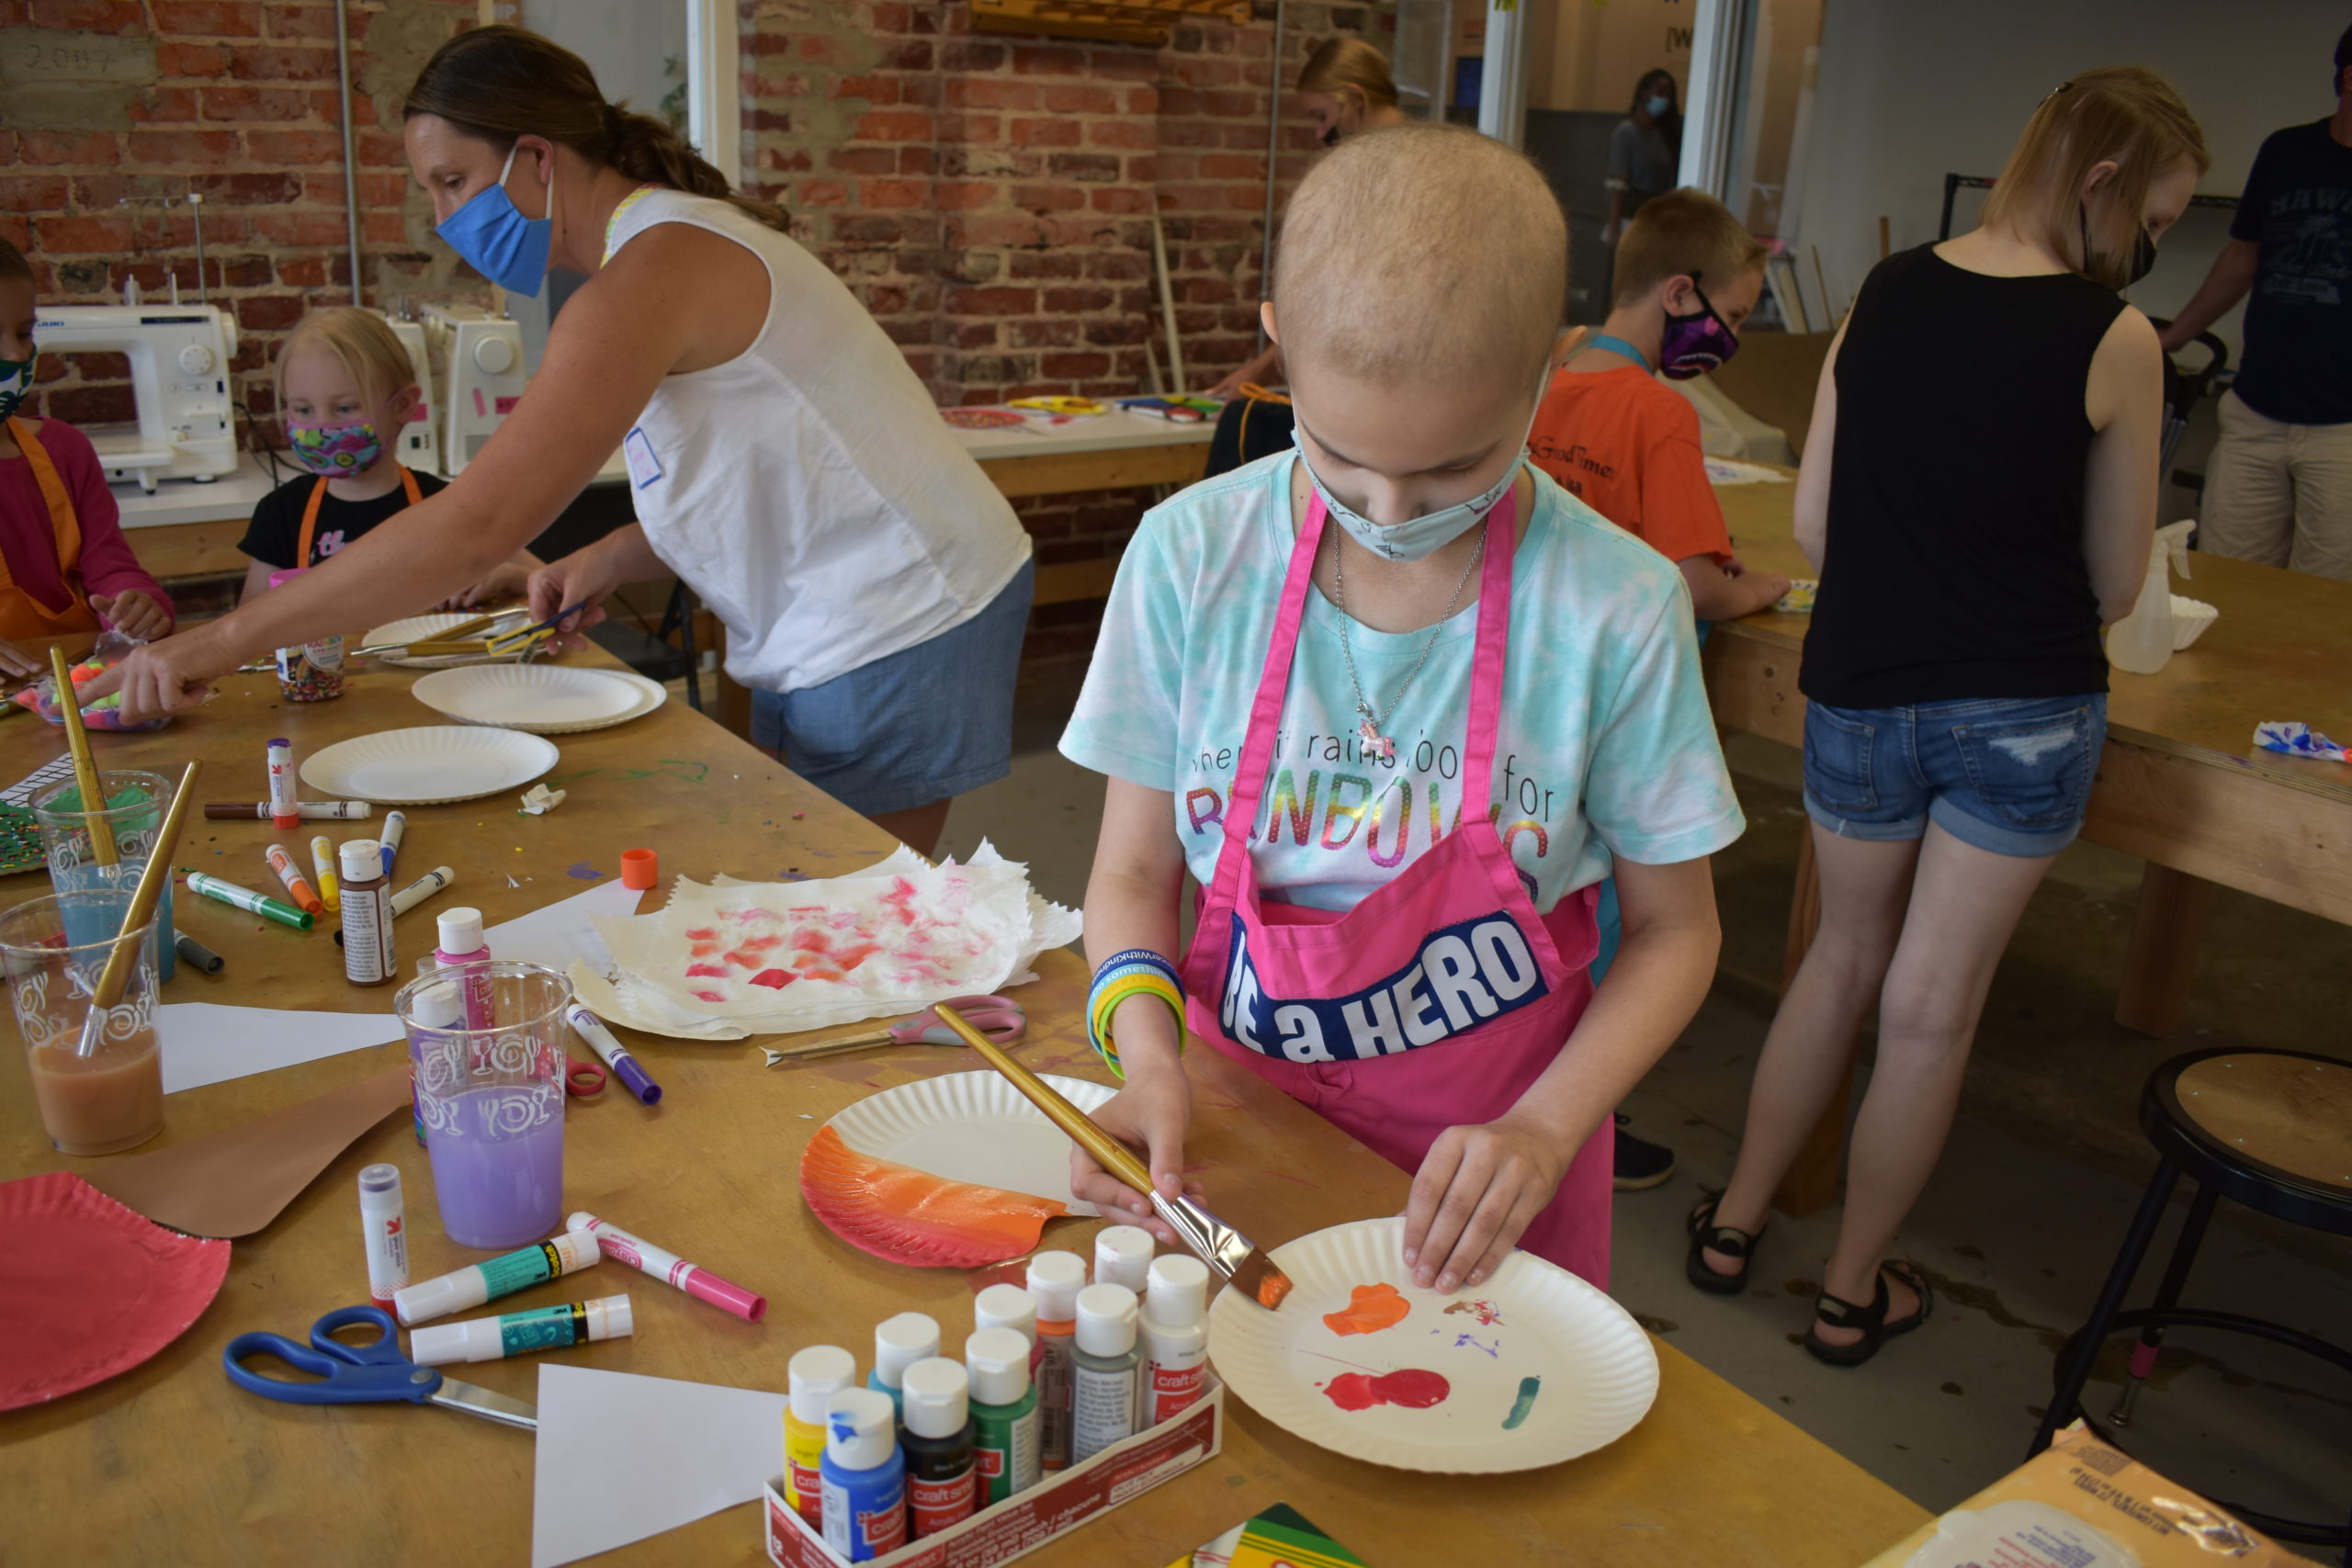 Image a child painting a paper plate in an art studio